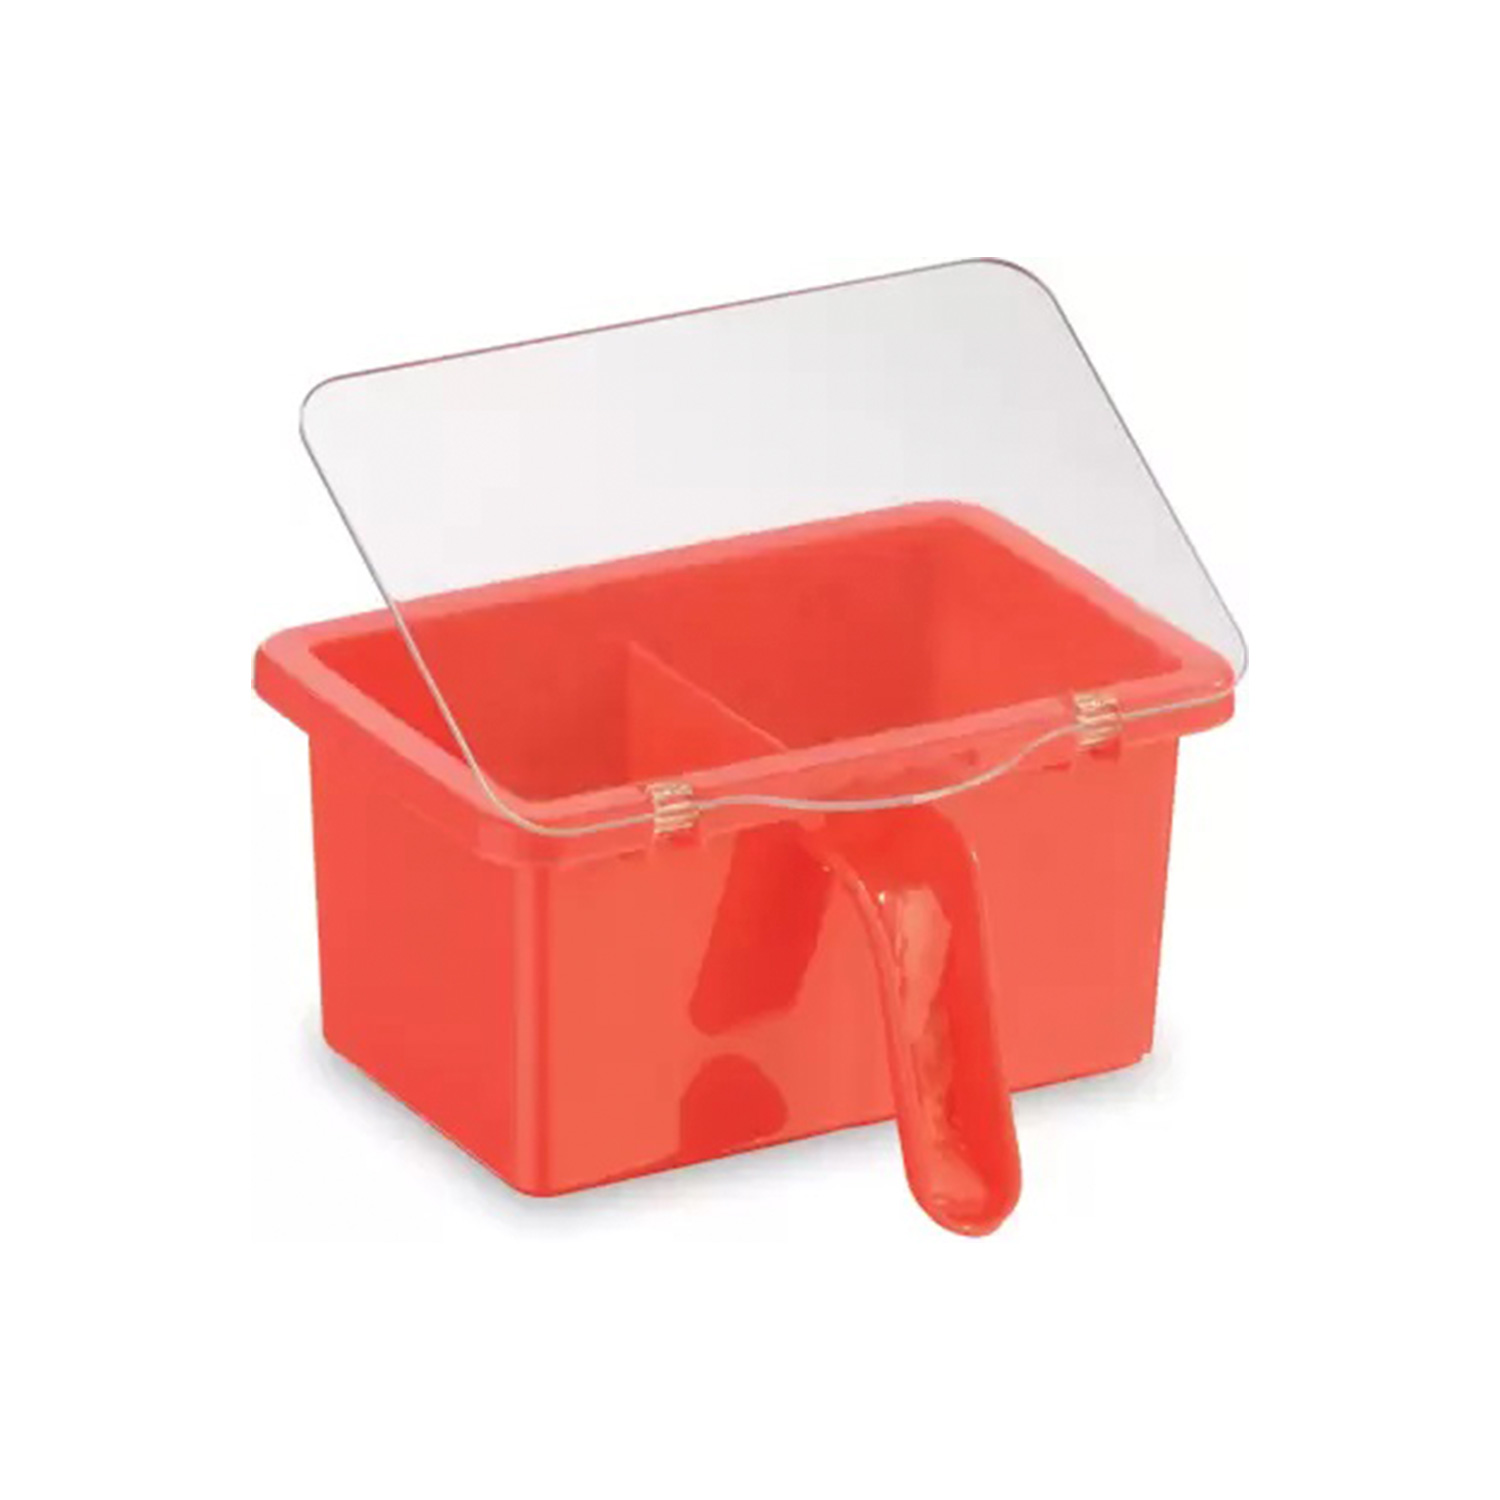 Sukhson India Plastic Spice Container  – 500 ml (Red)